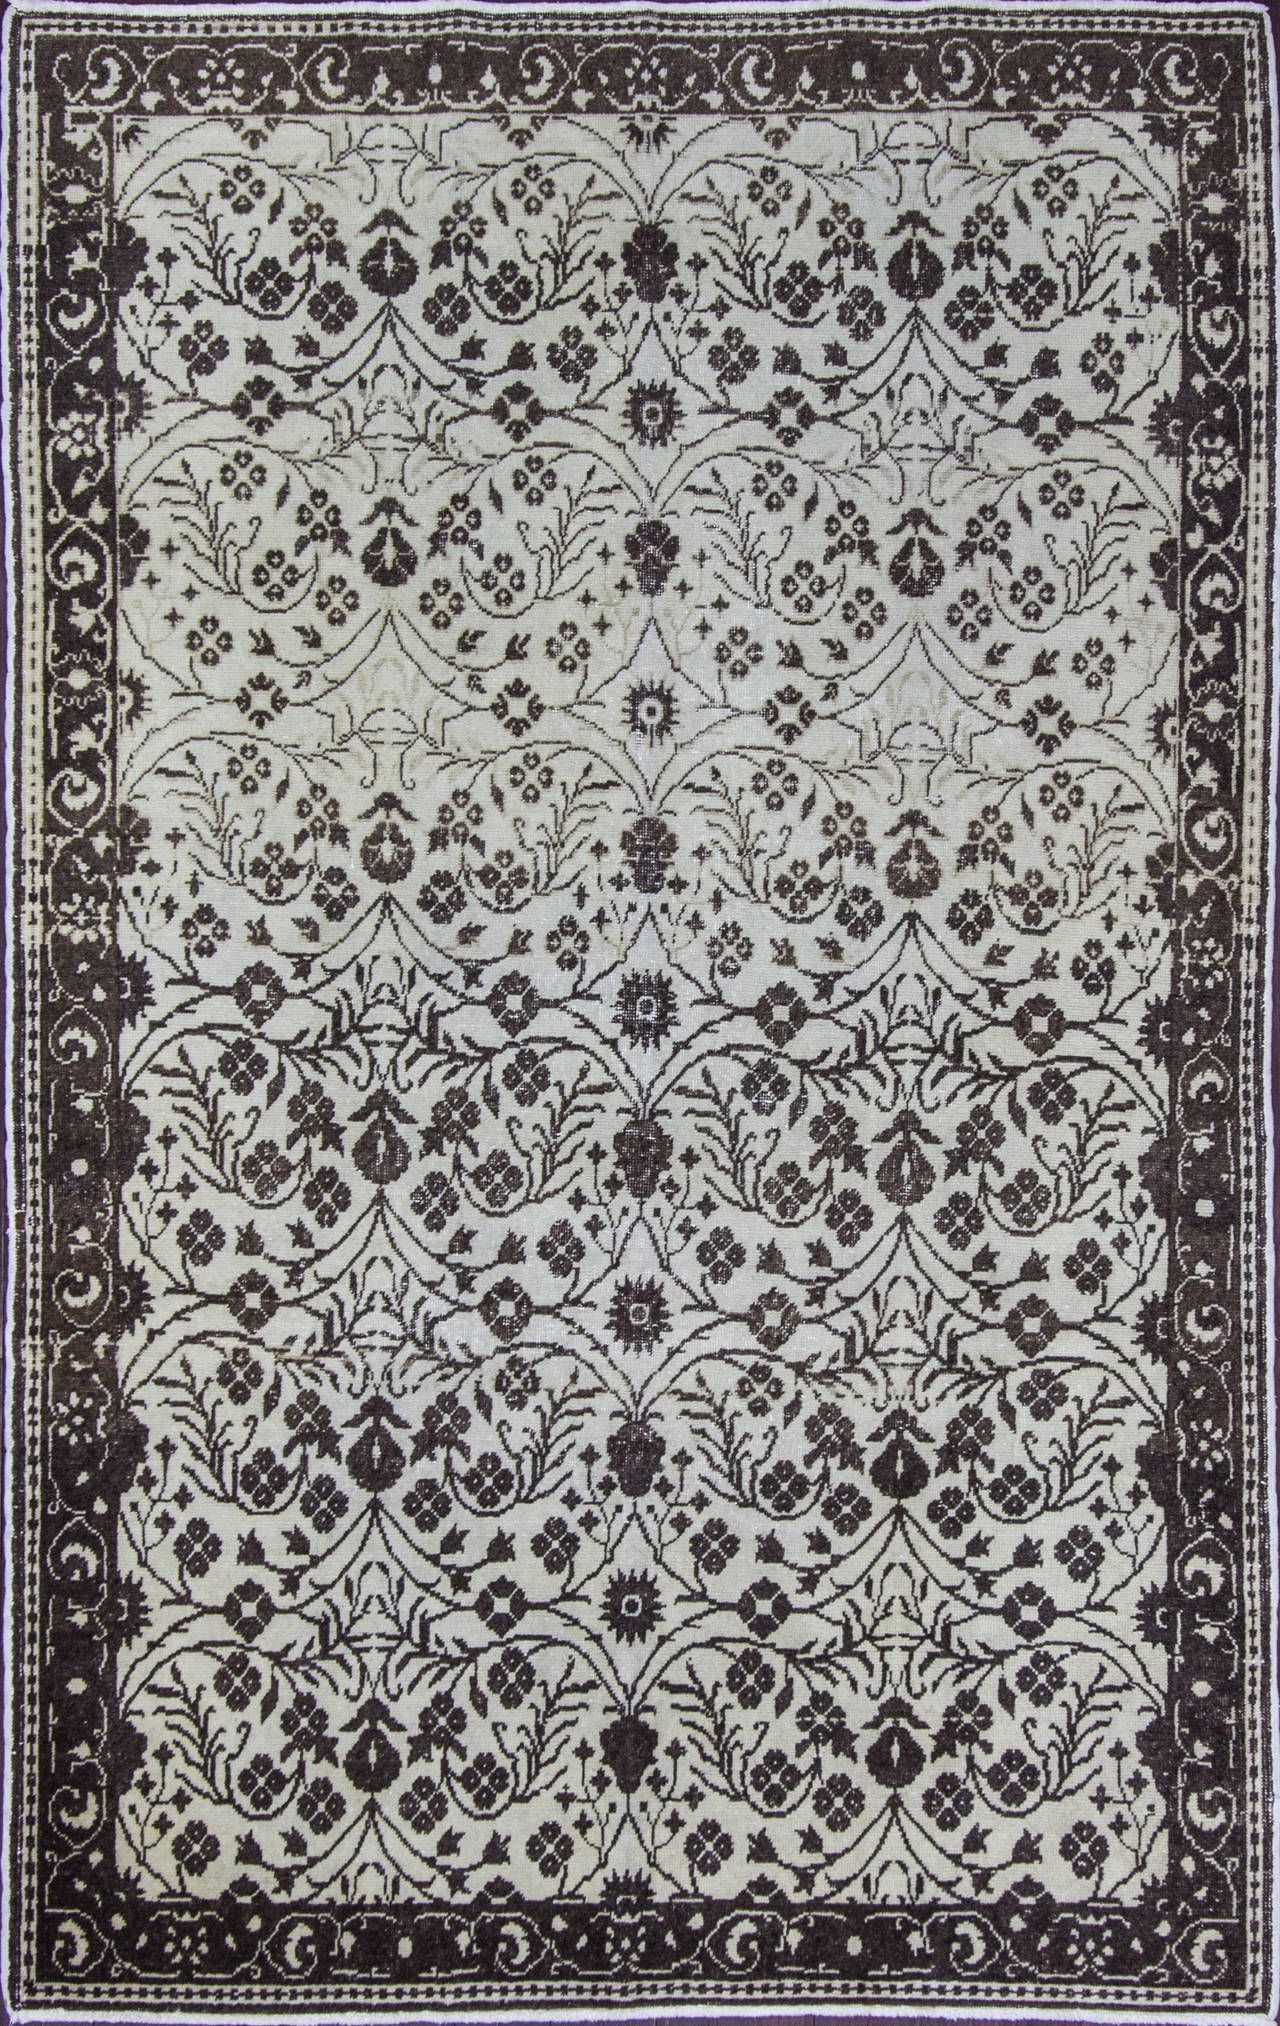 Ushak rugs have been in production since the 15th century with superb wools and natural dyes, 4'6